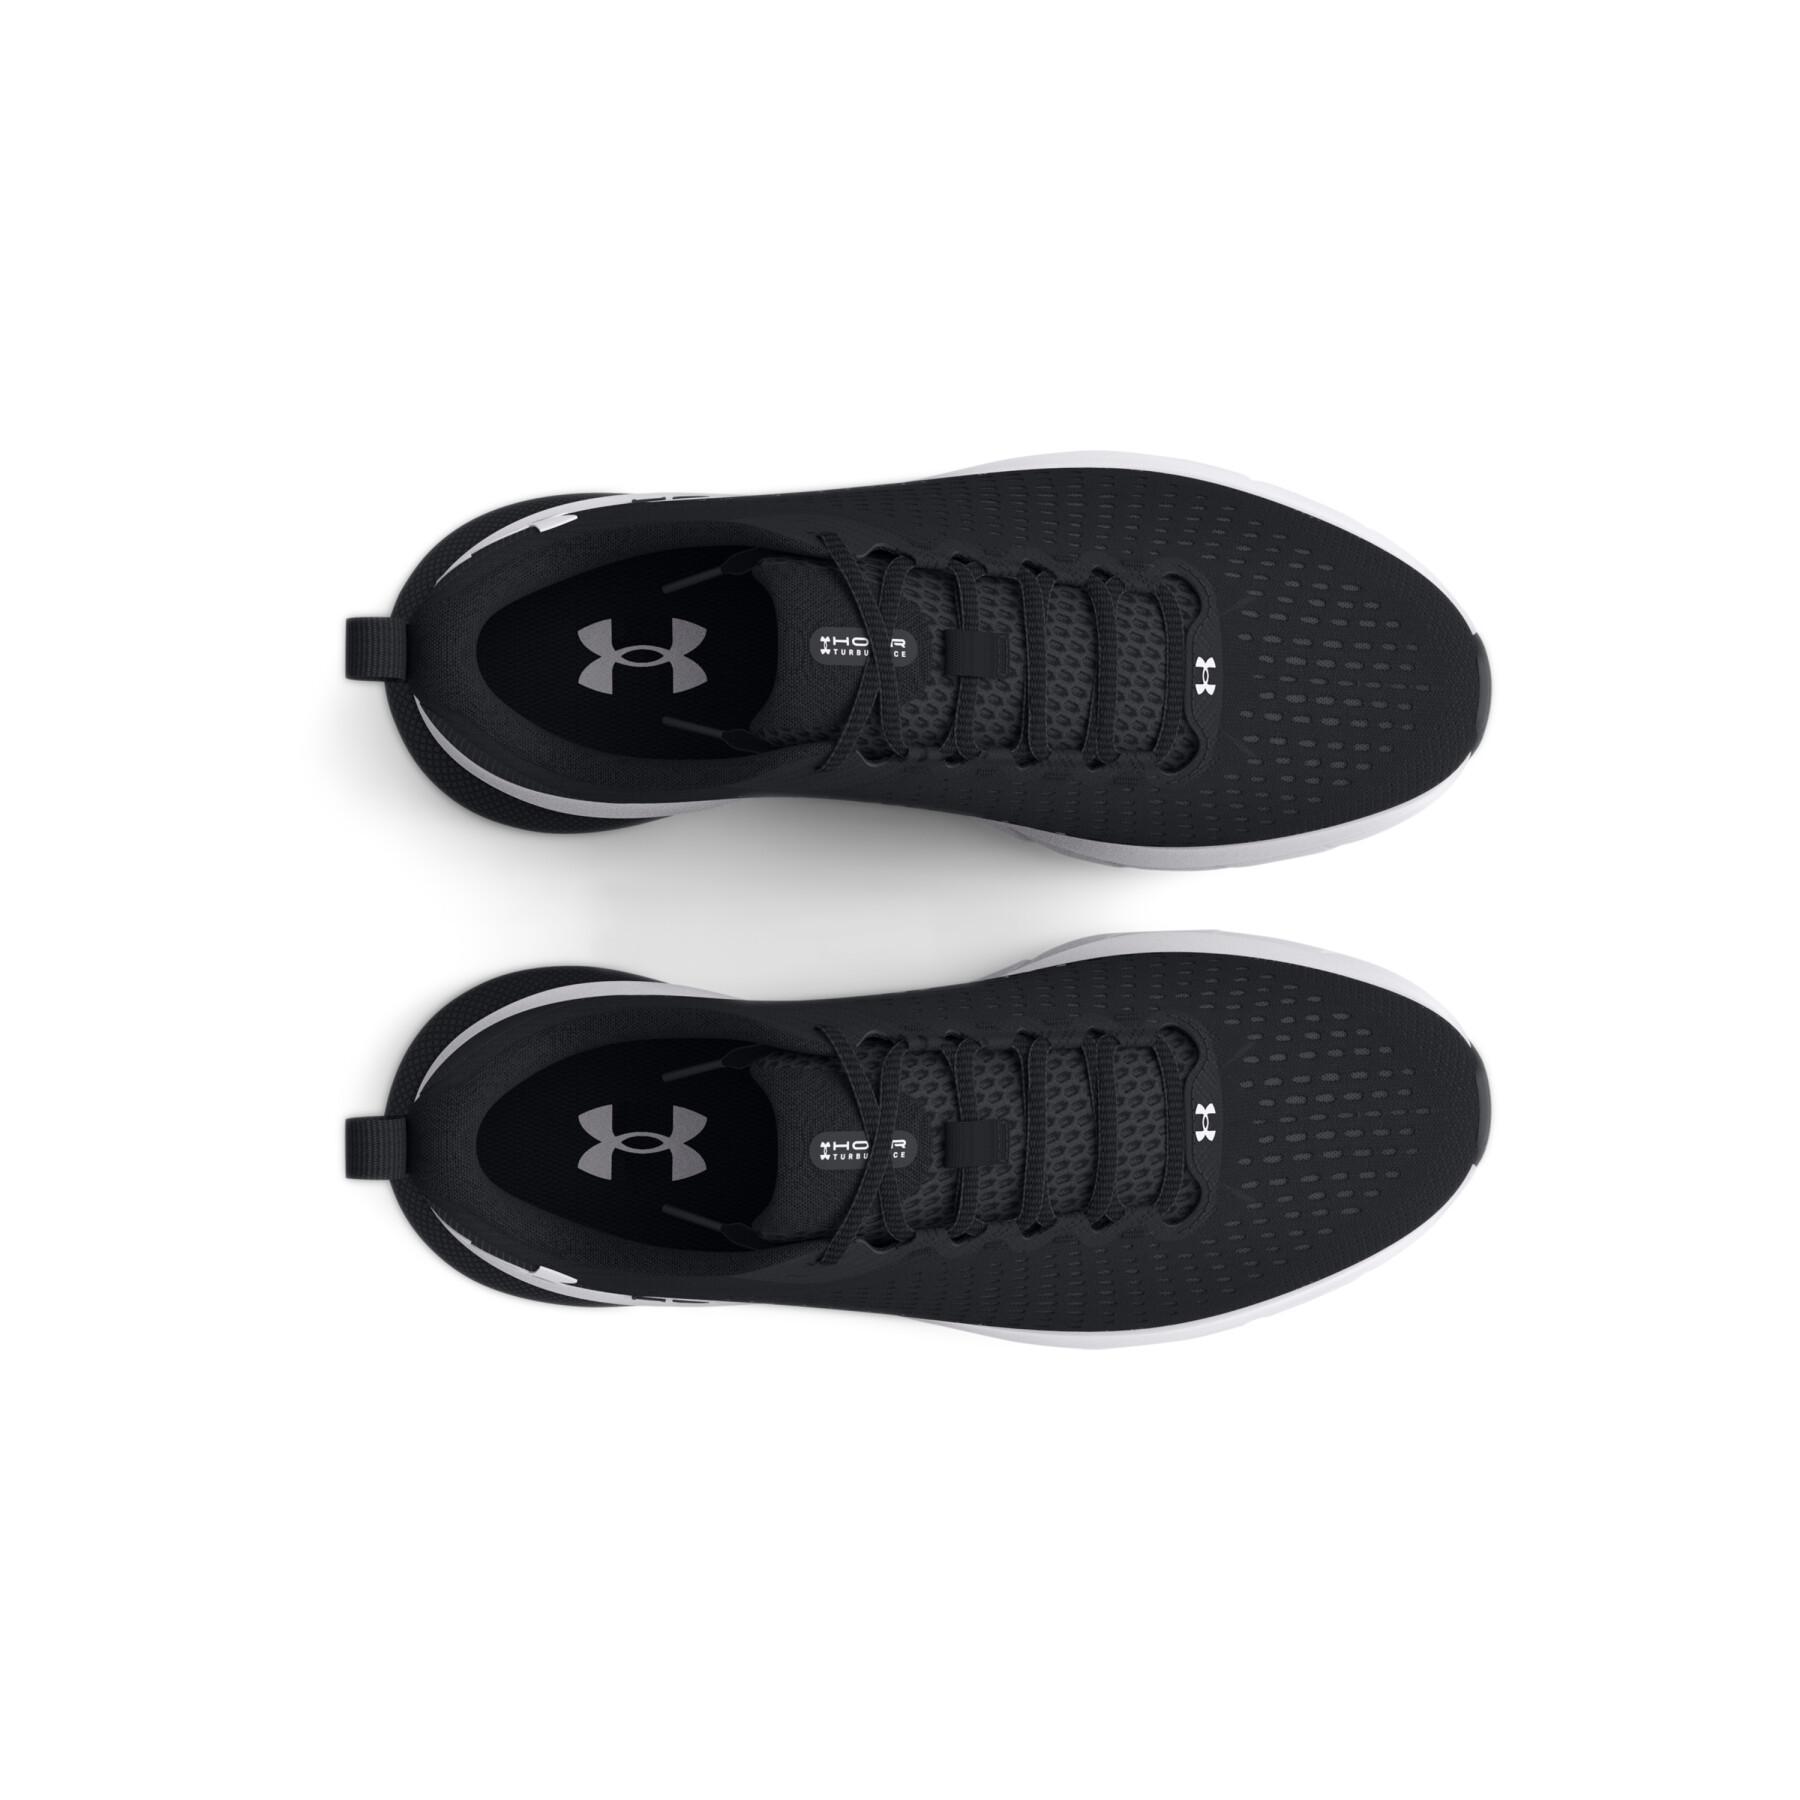 Running shoes Under Armour HOVR™ Turbulence